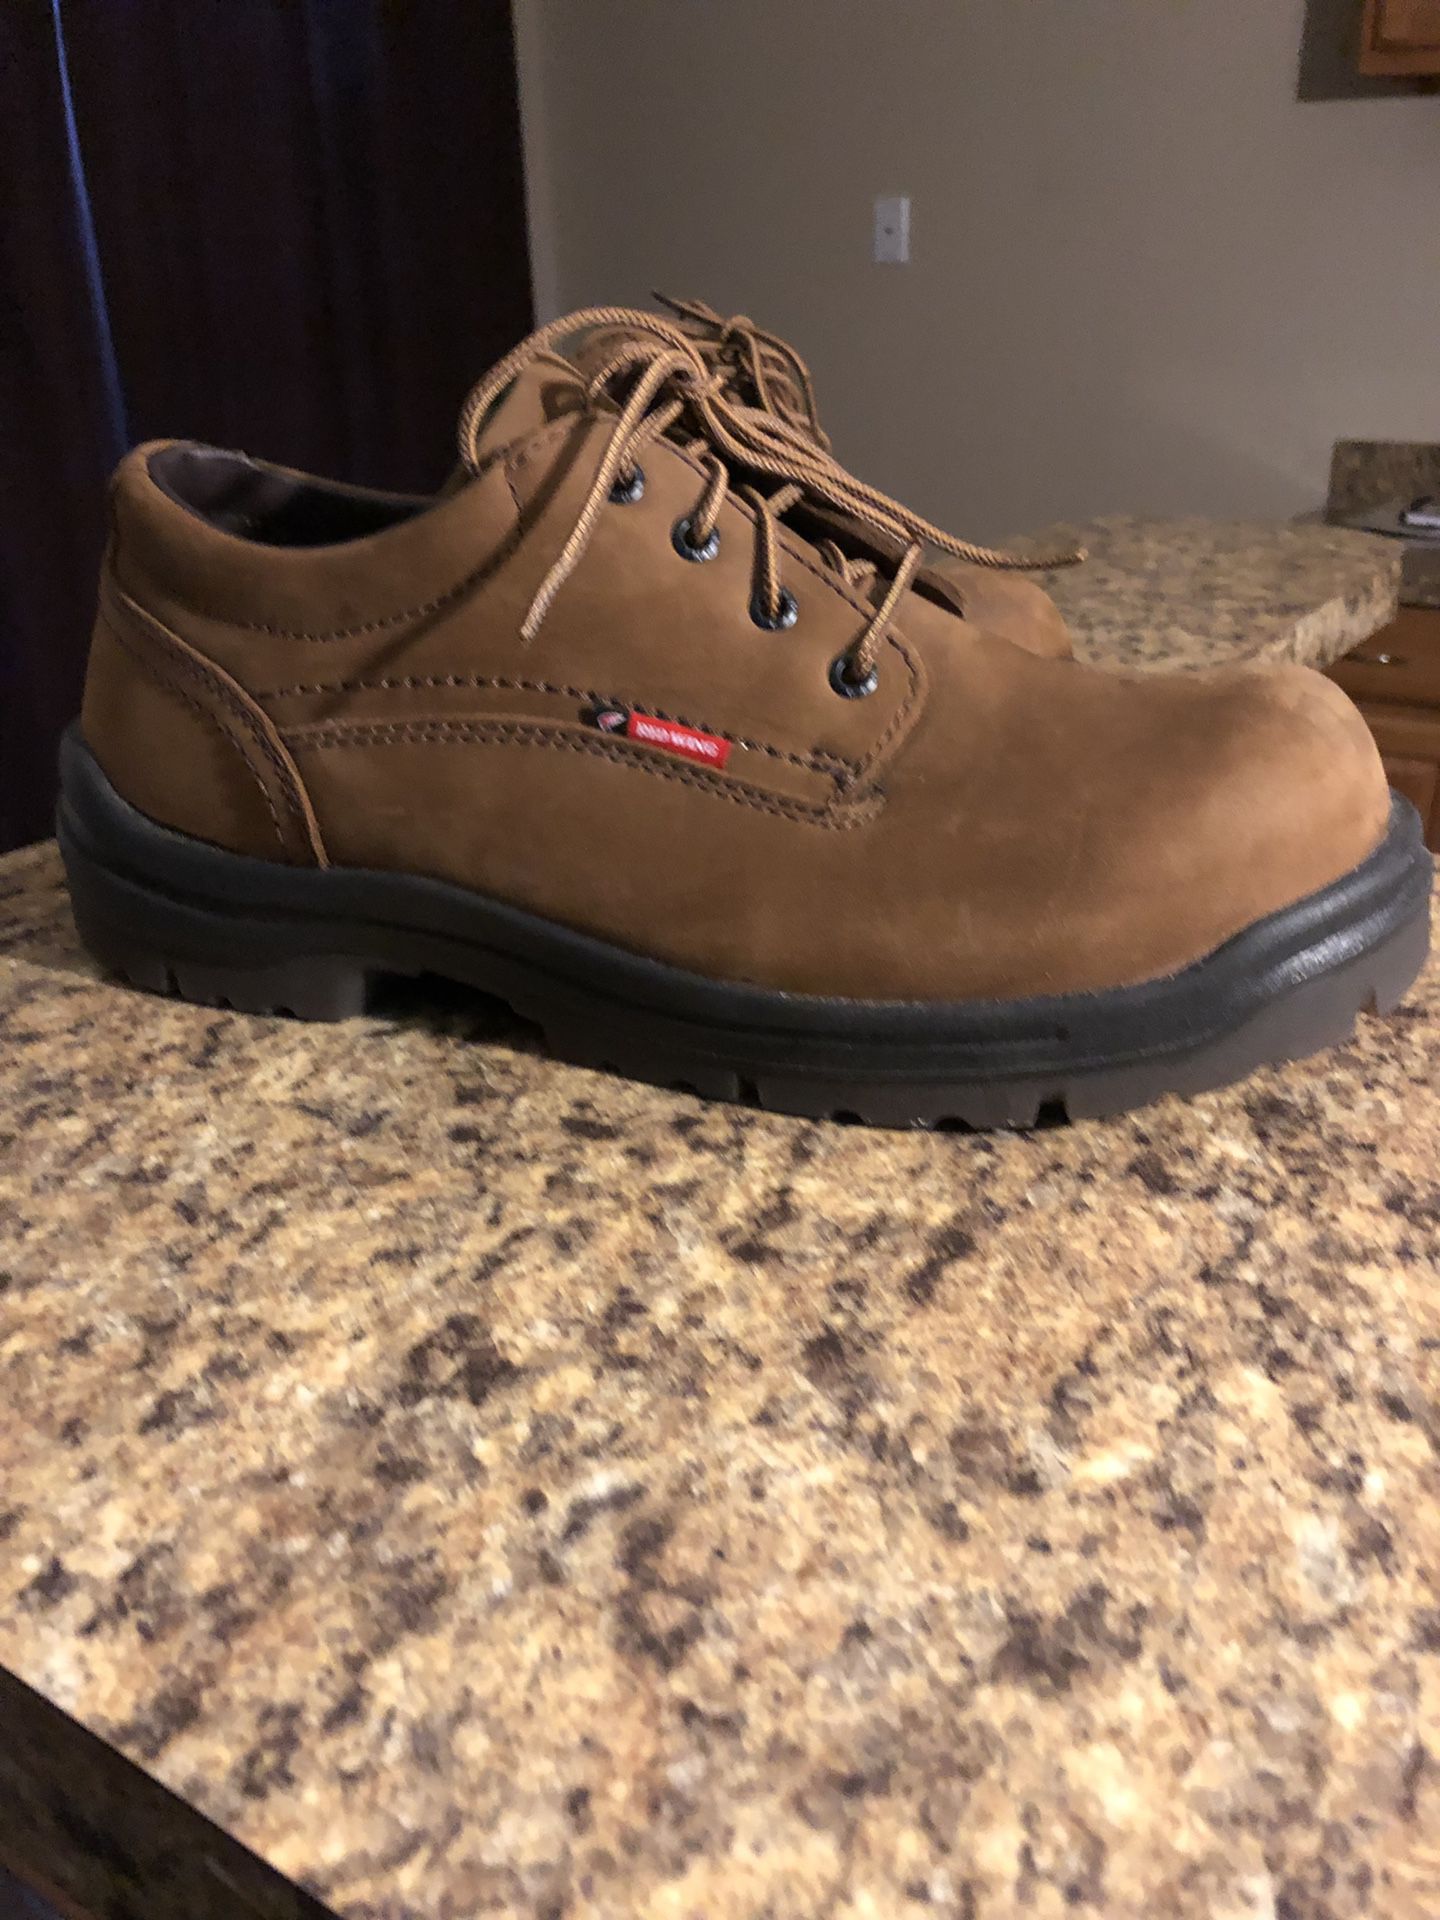 Red Wings 6634 Steel Toe Work Boots size 11